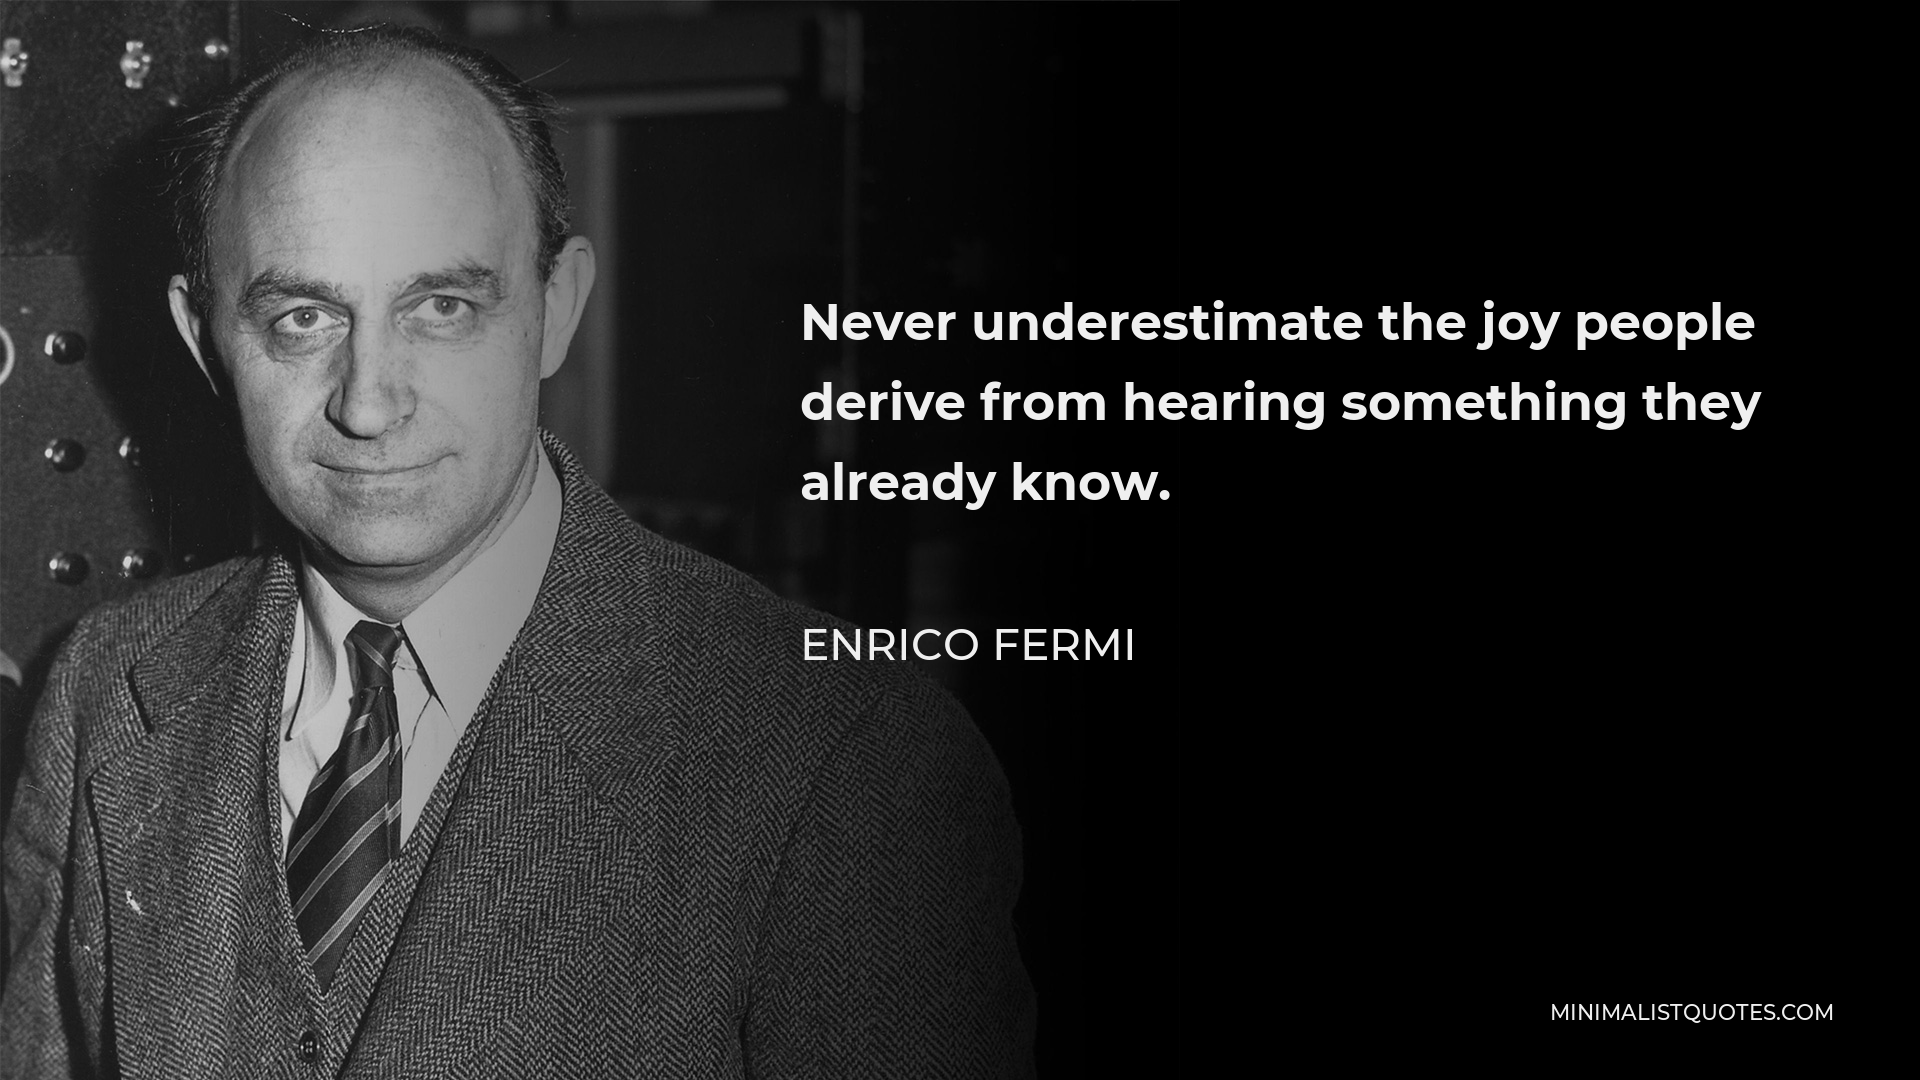 Enrico Fermi Quote - Never underestimate the joy people derive from hearing something they already know.